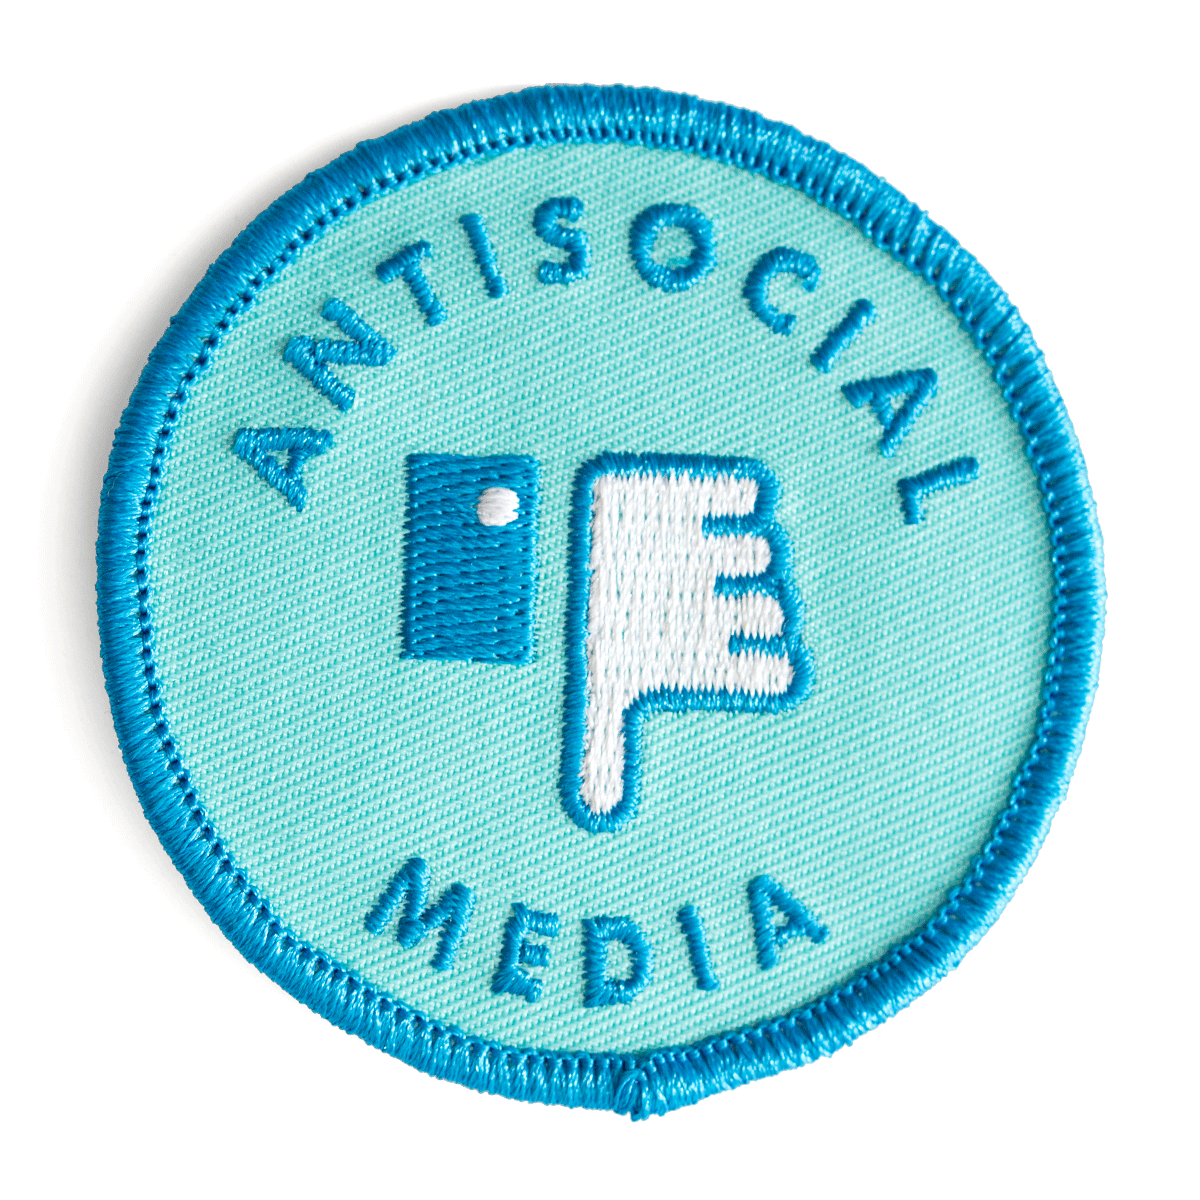 Antisocial Media Embroidered Iron-On Patch - Spiral Circle